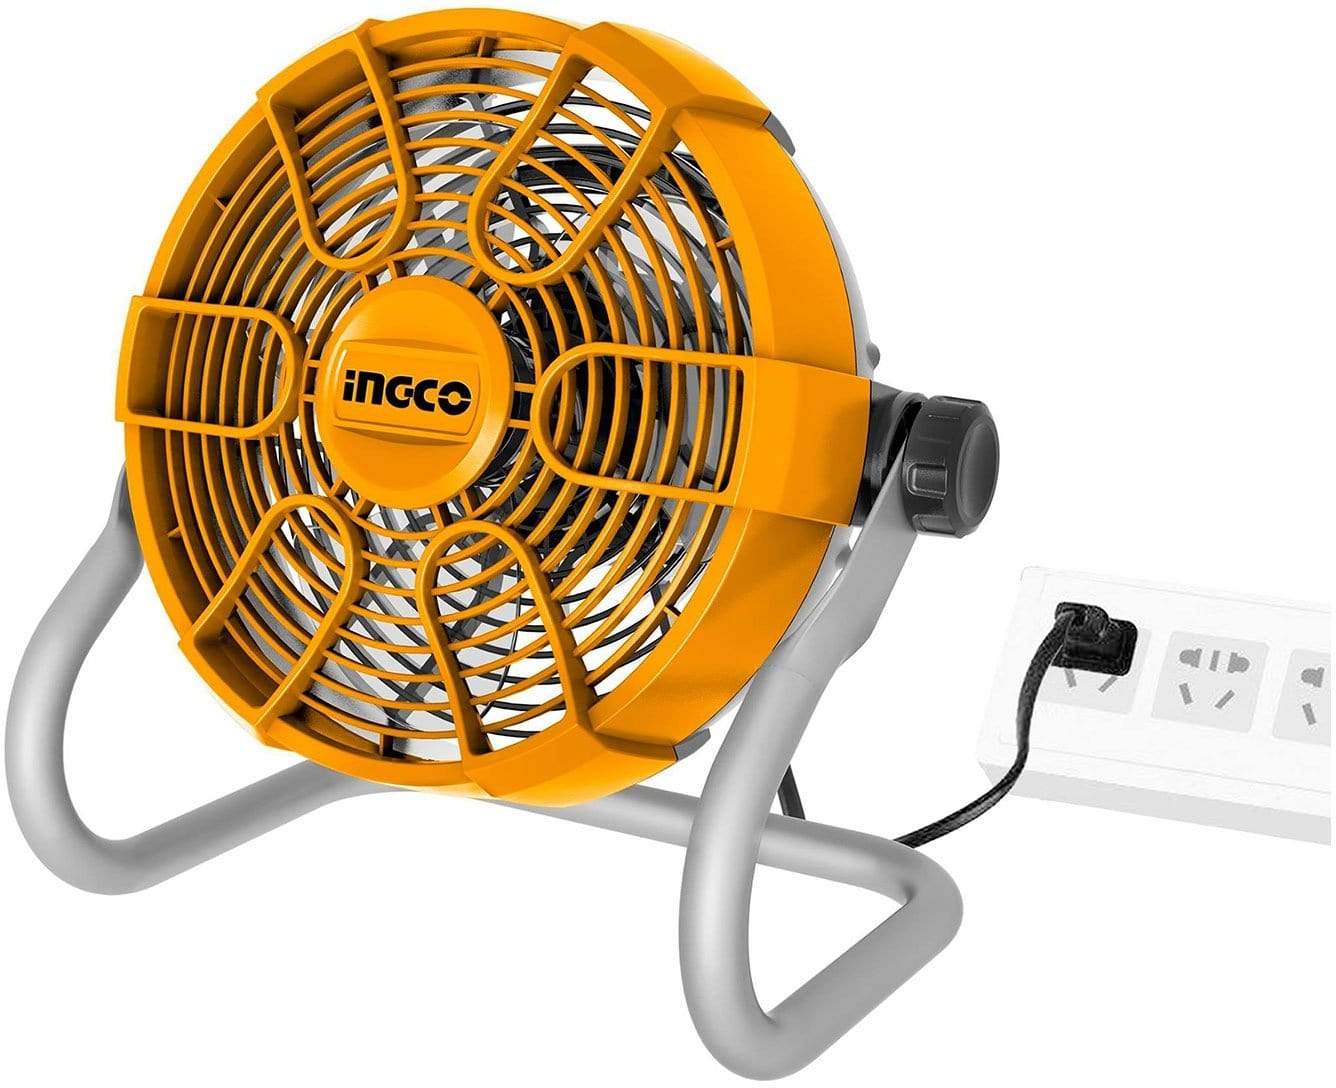 Ingco Lithium-Ion Fan 11" - CFALI2002 | Supply Master | Accra, Ghana Building Material With 20V Battery & Charger Building Steel Engineering Hardware tool